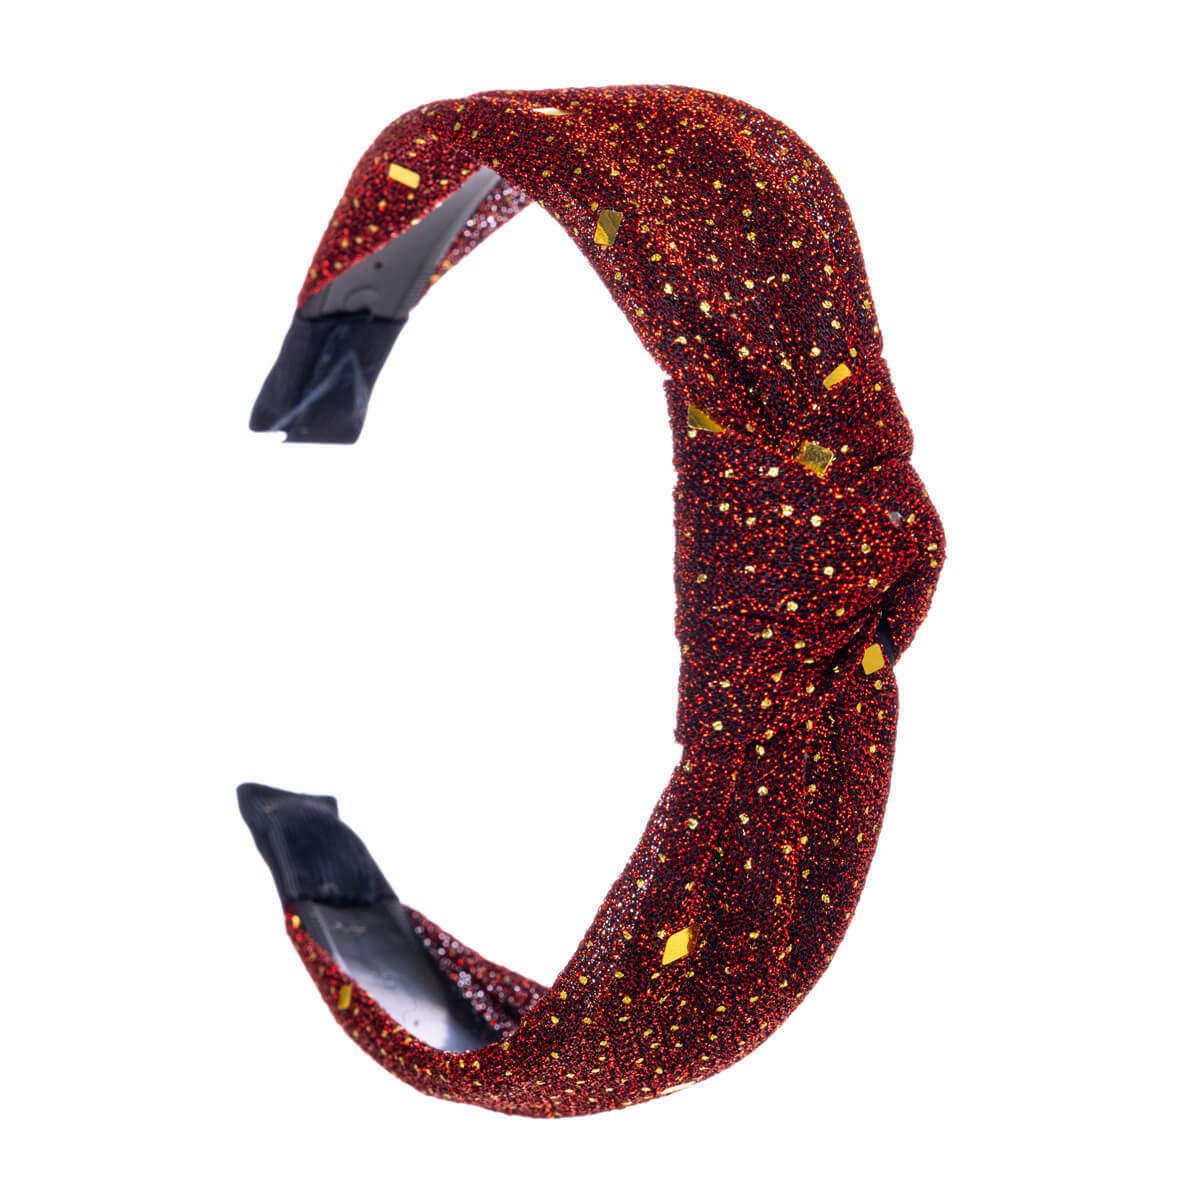 Glittery hairband with knot 3cm